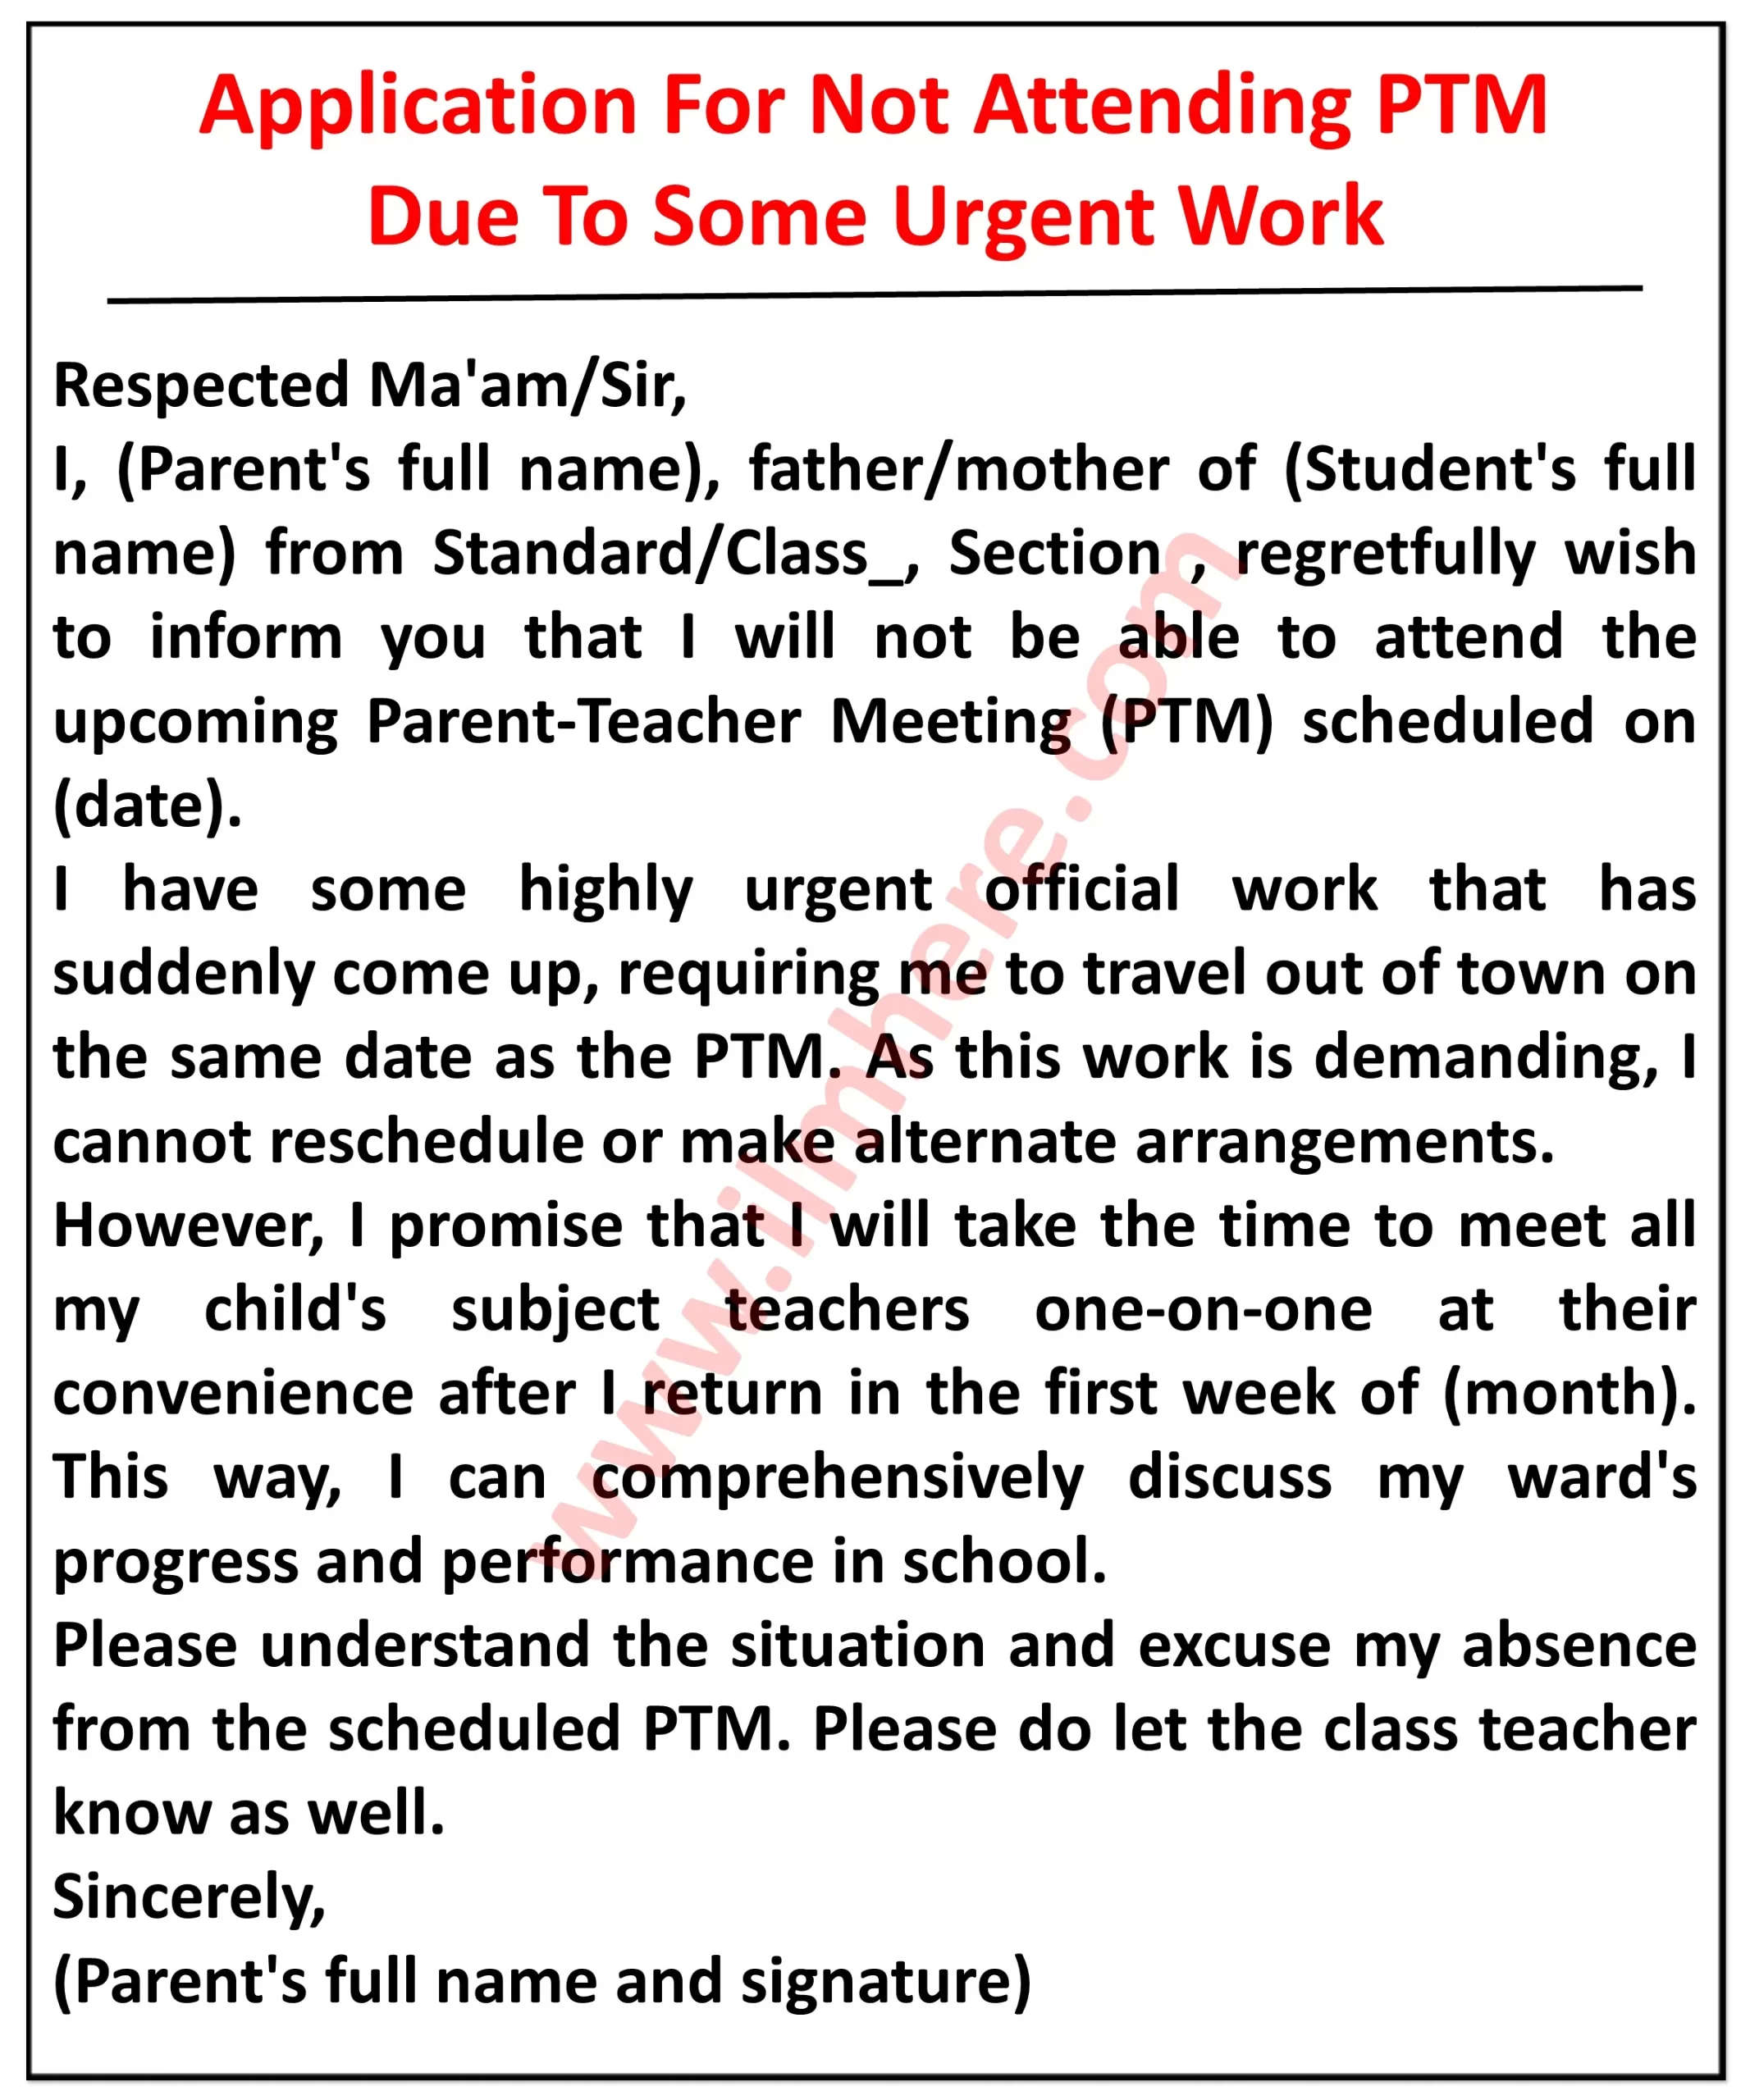  It appears to be an application for leave of absence from a parent-teacher meeting (PTM) due to some urgent work.Here's what I can see in the image: Top section: It reads "Application For Not Attending PTM Due To Some Urgent Work" in bold letters. Body: It starts with "Respected Ma'am/Sir," followed by an apology for the absence due to urgent work. The applicant explains that they have highly urgent official work that has suddenly come up, requiring them to travel out of town on the same date as the PTM. They emphasize that the work is demanding and cannot be rescheduled or handled by someone else. Alternative request: The applicant assures the school that they will meet with all their child's subject teachers one-on-one in the first week of [month] after they return. They express their desire to comprehensively discuss their child's progress and performance in school. Closing: The applicant requests understanding for their situation and apologizes for missing the PTM. They ask the school to inform the class teacher about their absence. Finally, they sign the application with their full name and signature. Overall, the application politely informs the school about the parent's inability to attend the PTM due to urgent work and proposes an alternative meeting with the teachers later to discuss their child's academic progress.